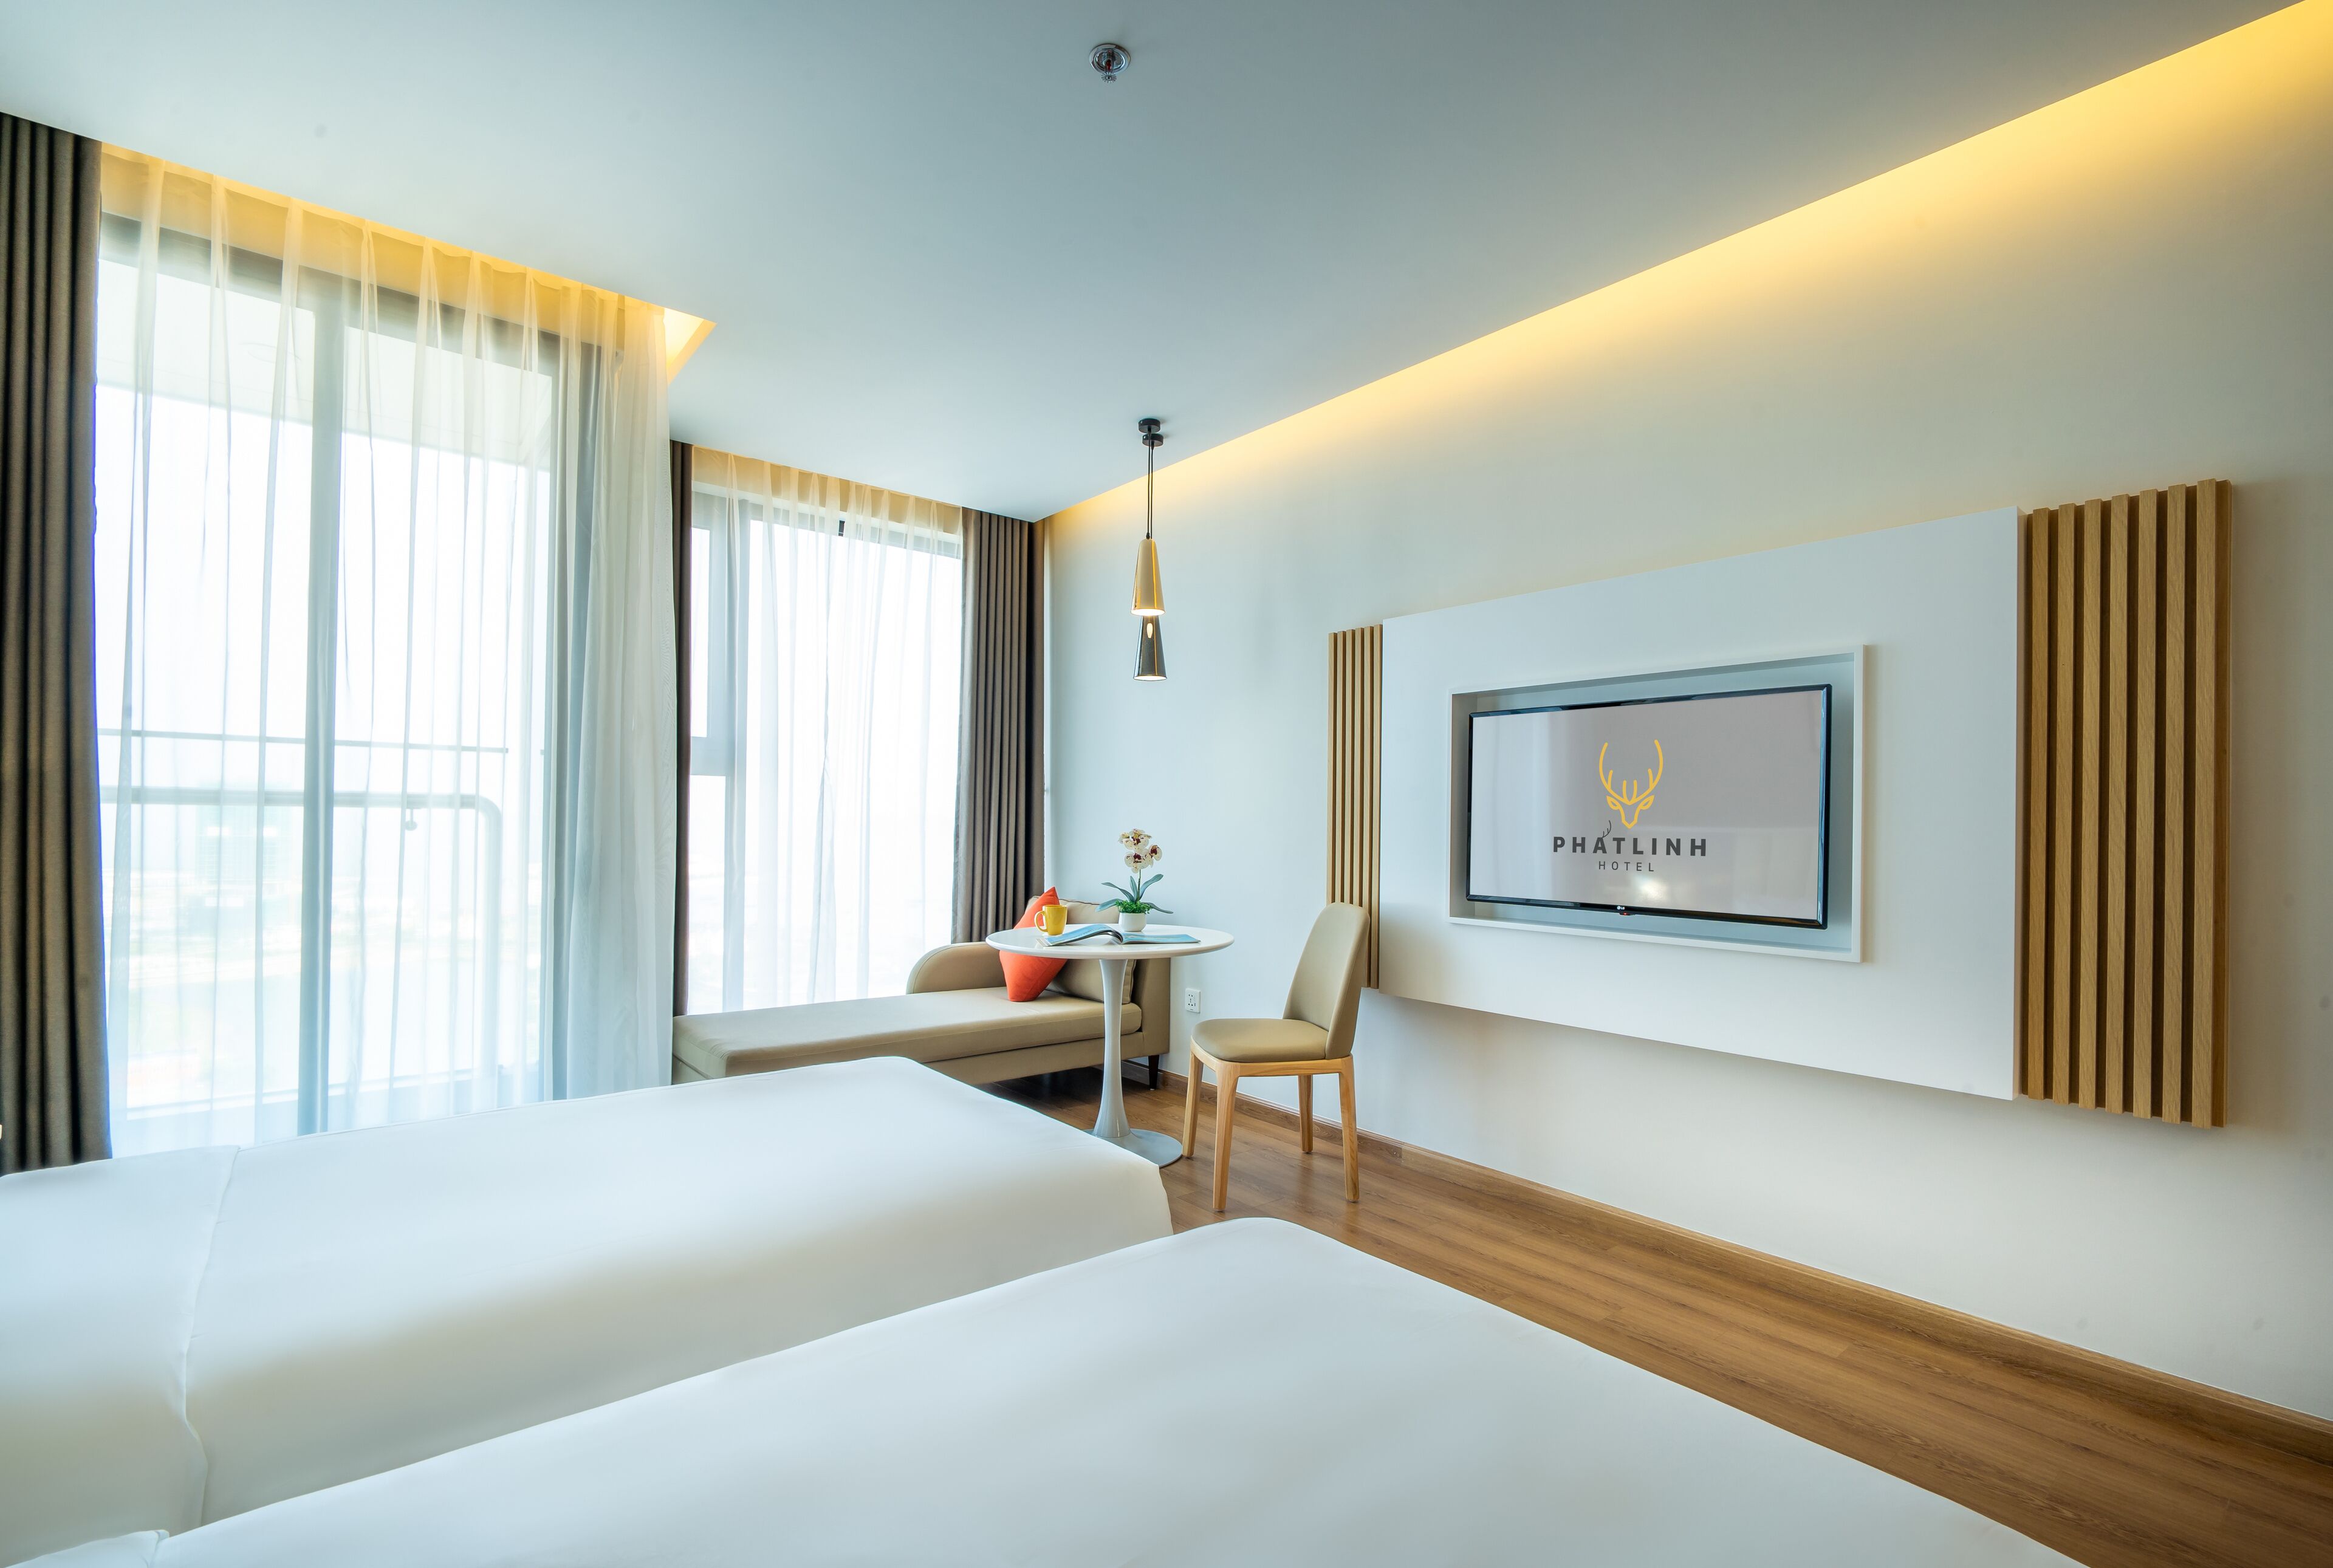 Phat Linh Hotel